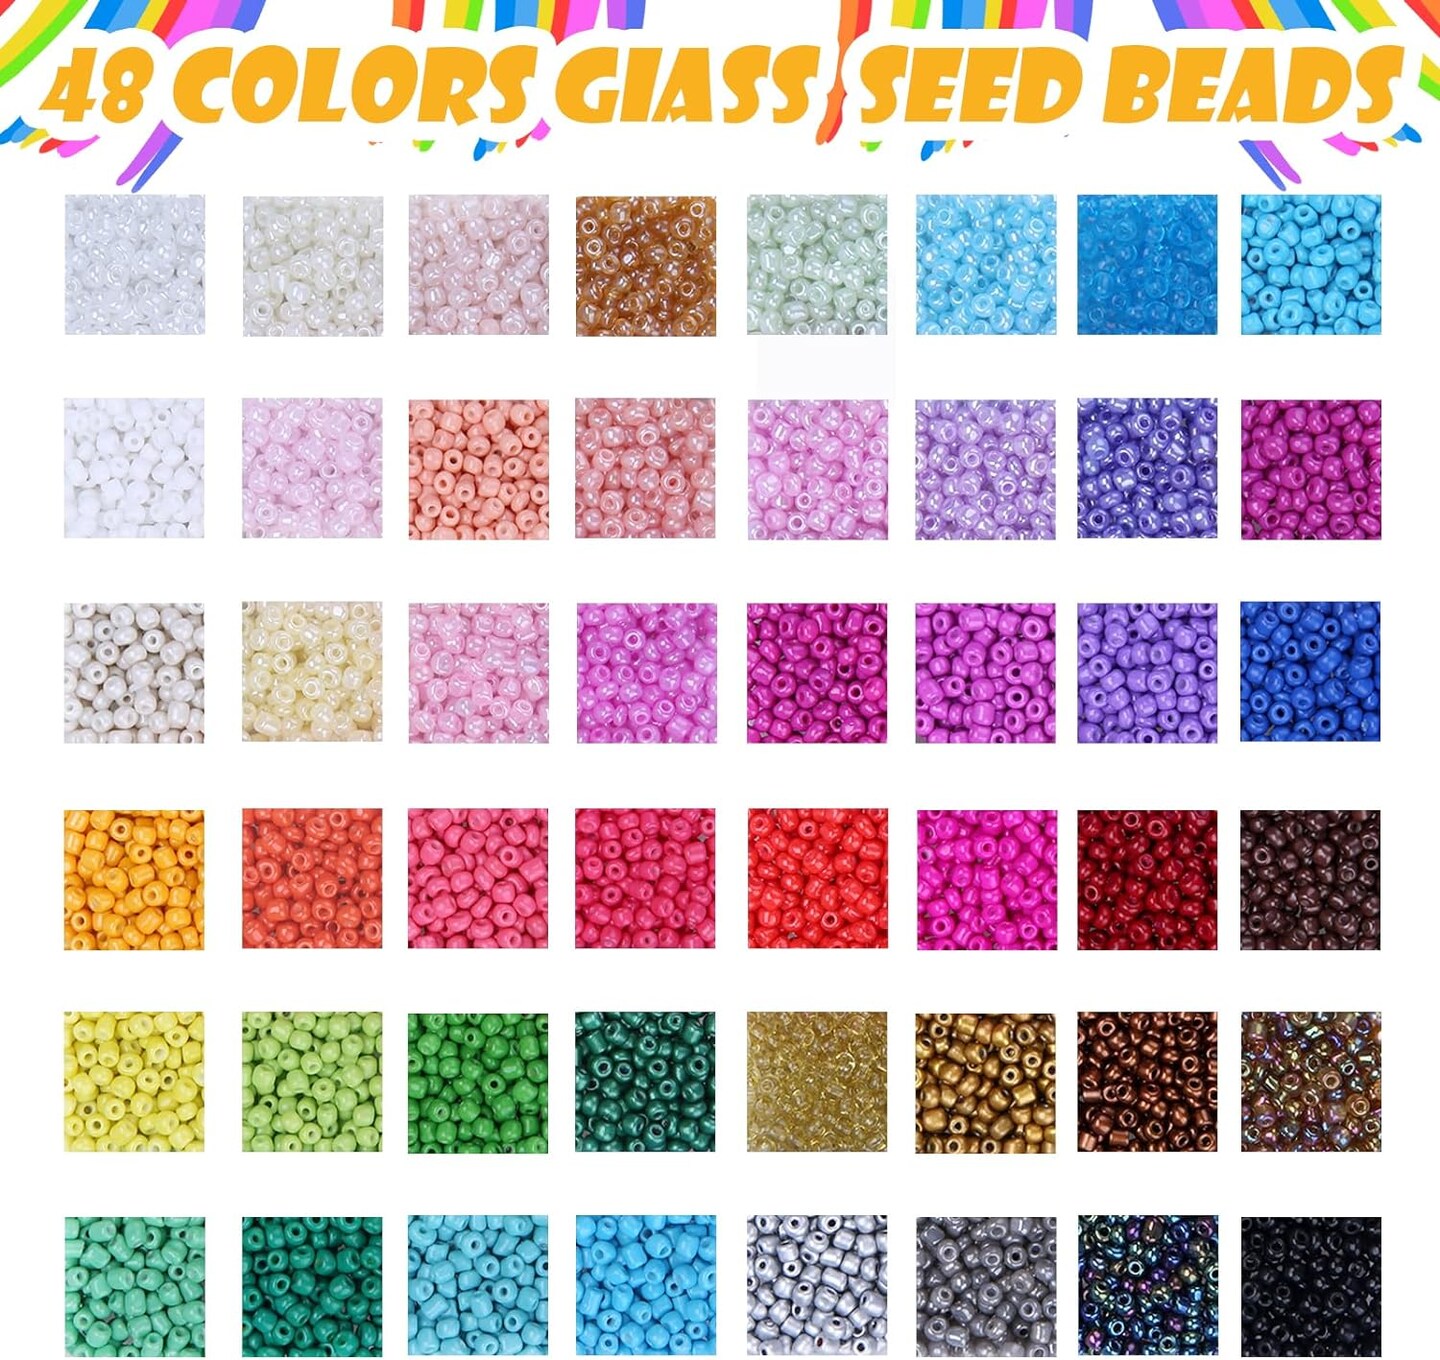 6720 pcs 4mm Seed Beads for Jewelry Making Kit, 6/0 48 Colors Bracelet Beads Pony Beads Waist Beads Kit with Pendant Charms Kit and Letter Beads